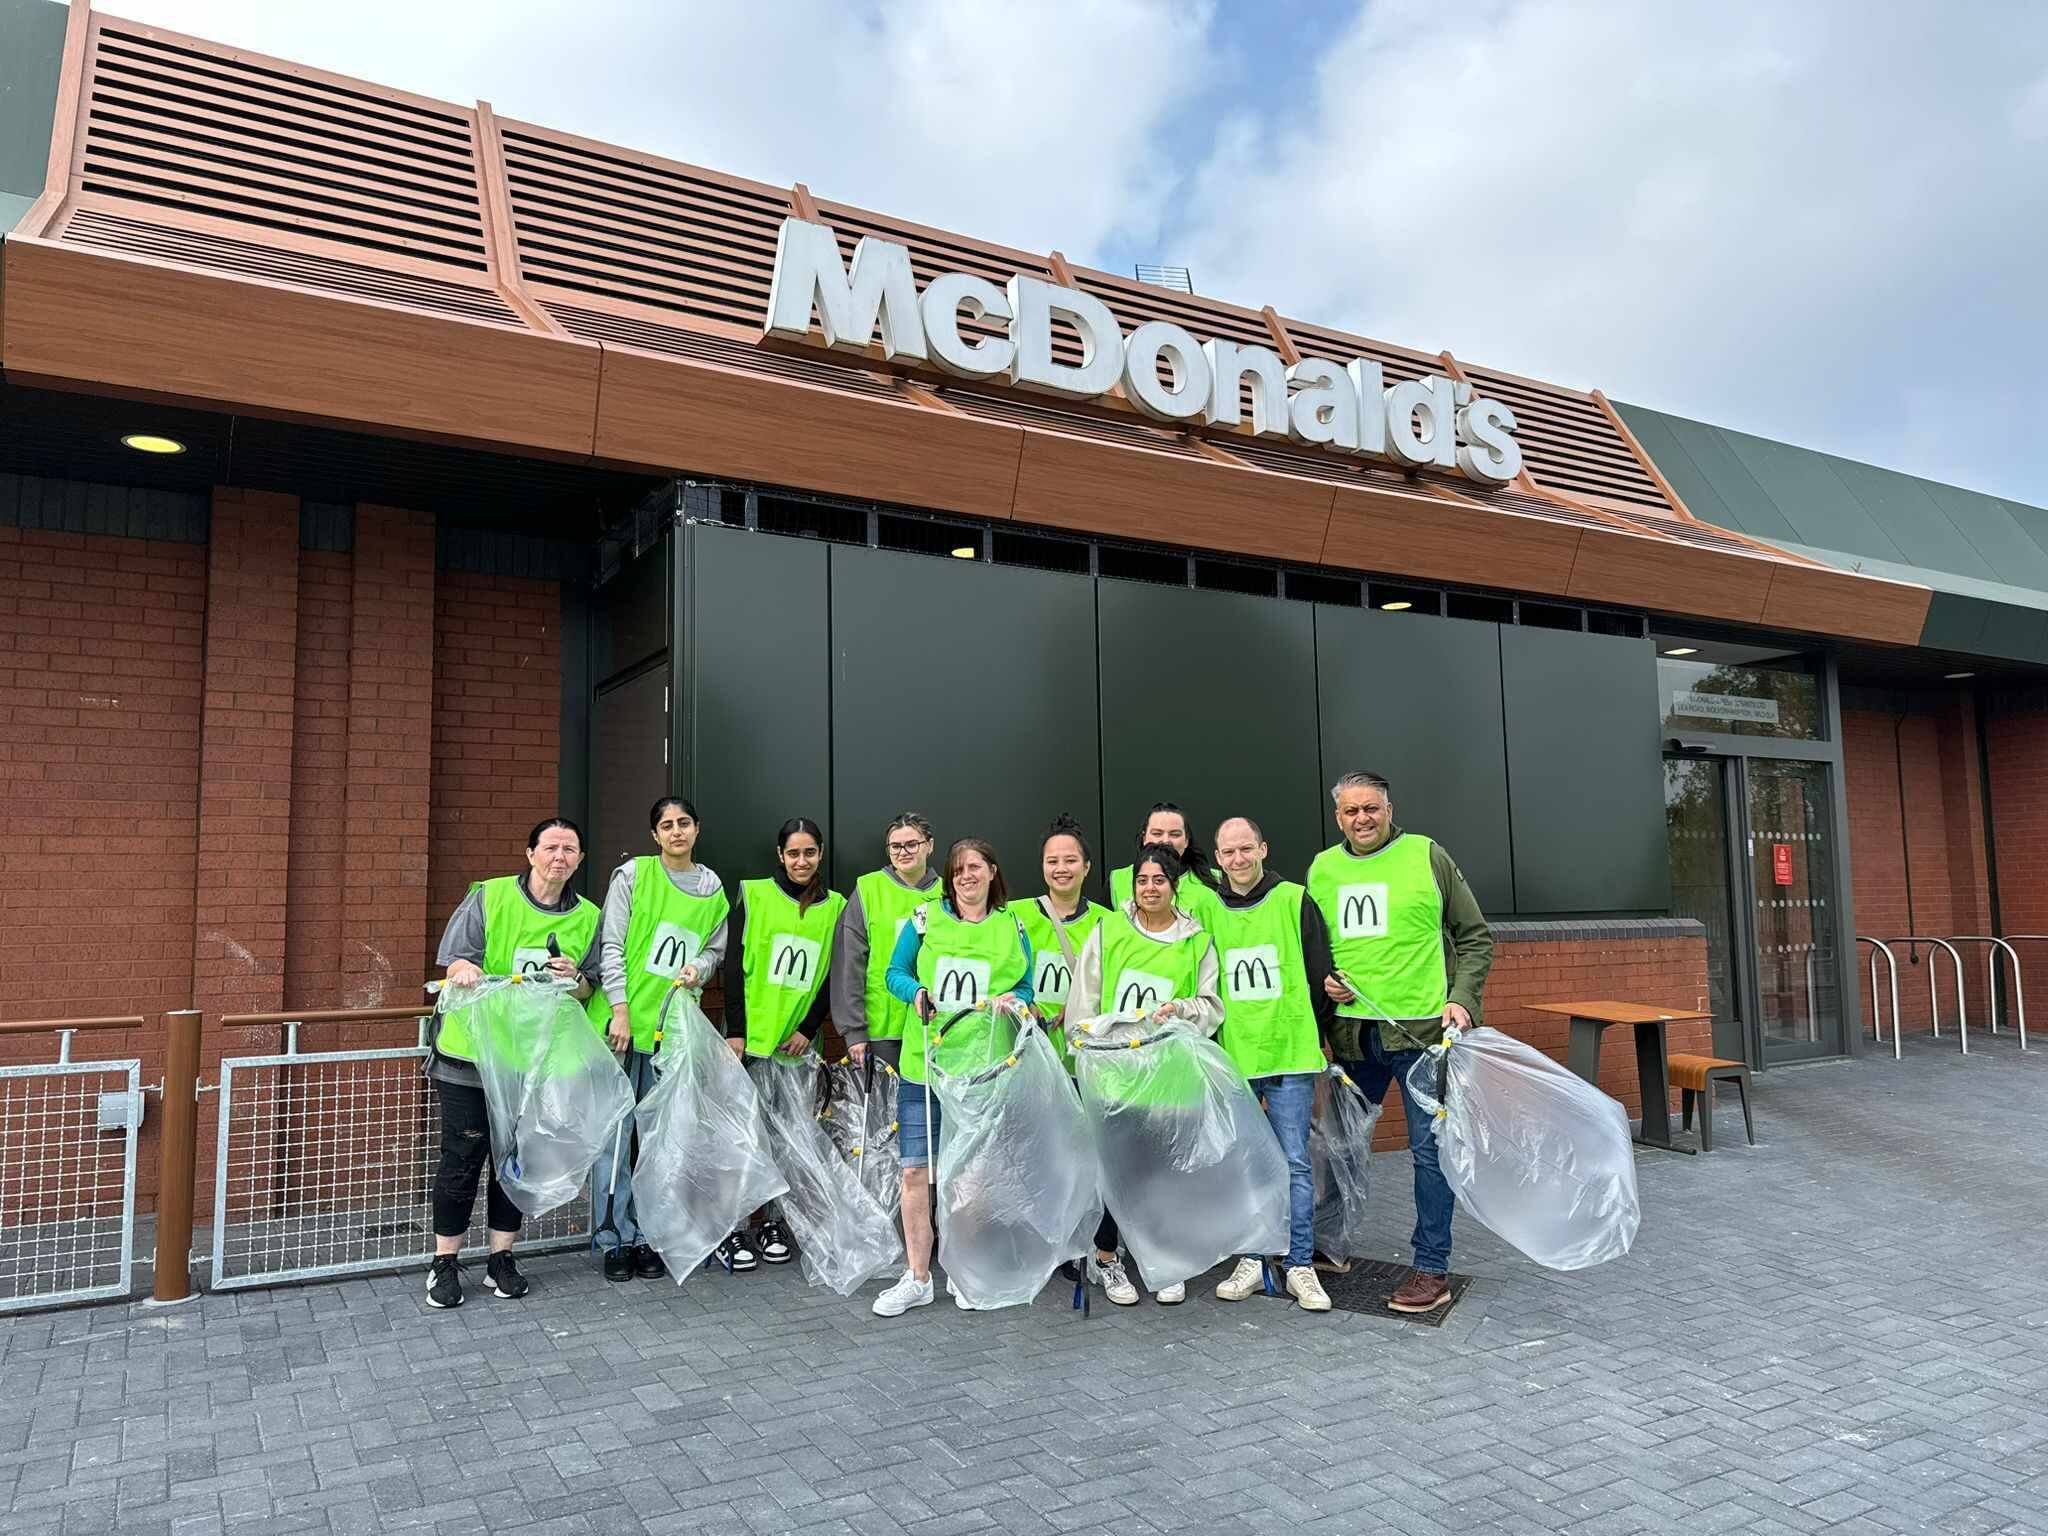 Team of McDonald's staff collect 48 bags of litter to protect environment